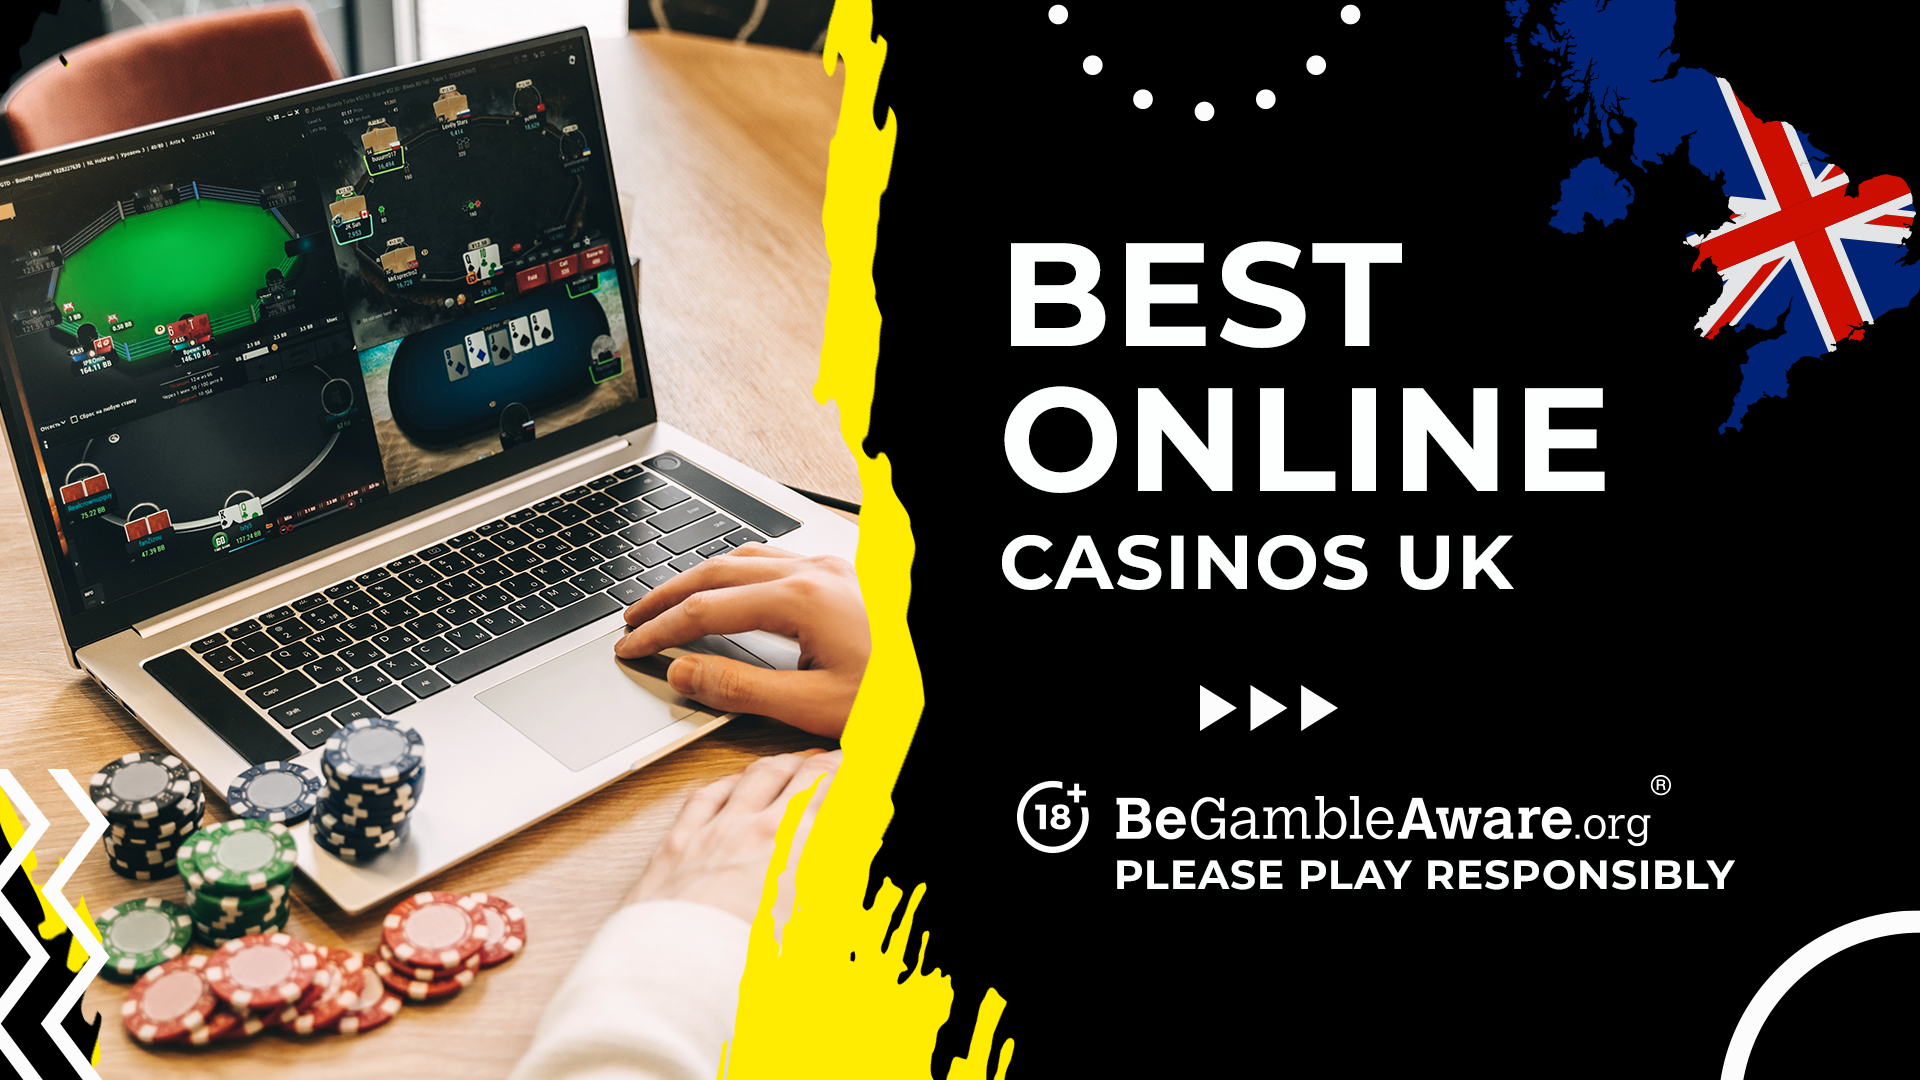 Top 3 Ways To Buy A Used Preventing Gambling Addiction: Resources and Support for Turkish Players